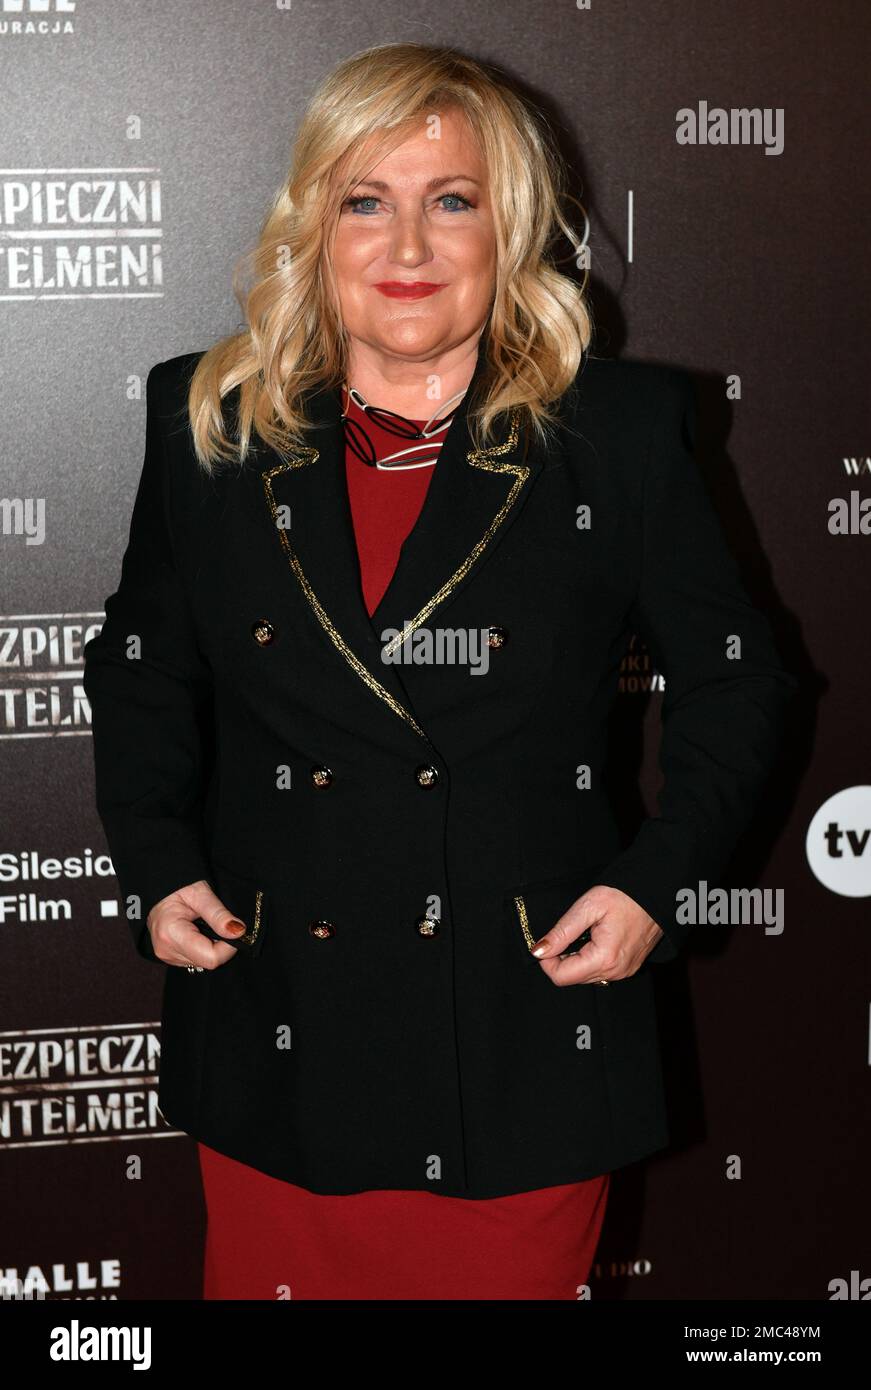 Singer Marlena Drozdowska attends the ceremonial premiere of the film 'Dangerous Gentlemen' directed by Marcin Kawalski took place at Cinema City in Warsaw. (Photo by Alex Bona / SOPA Images/Sipa USA) Stock Photo